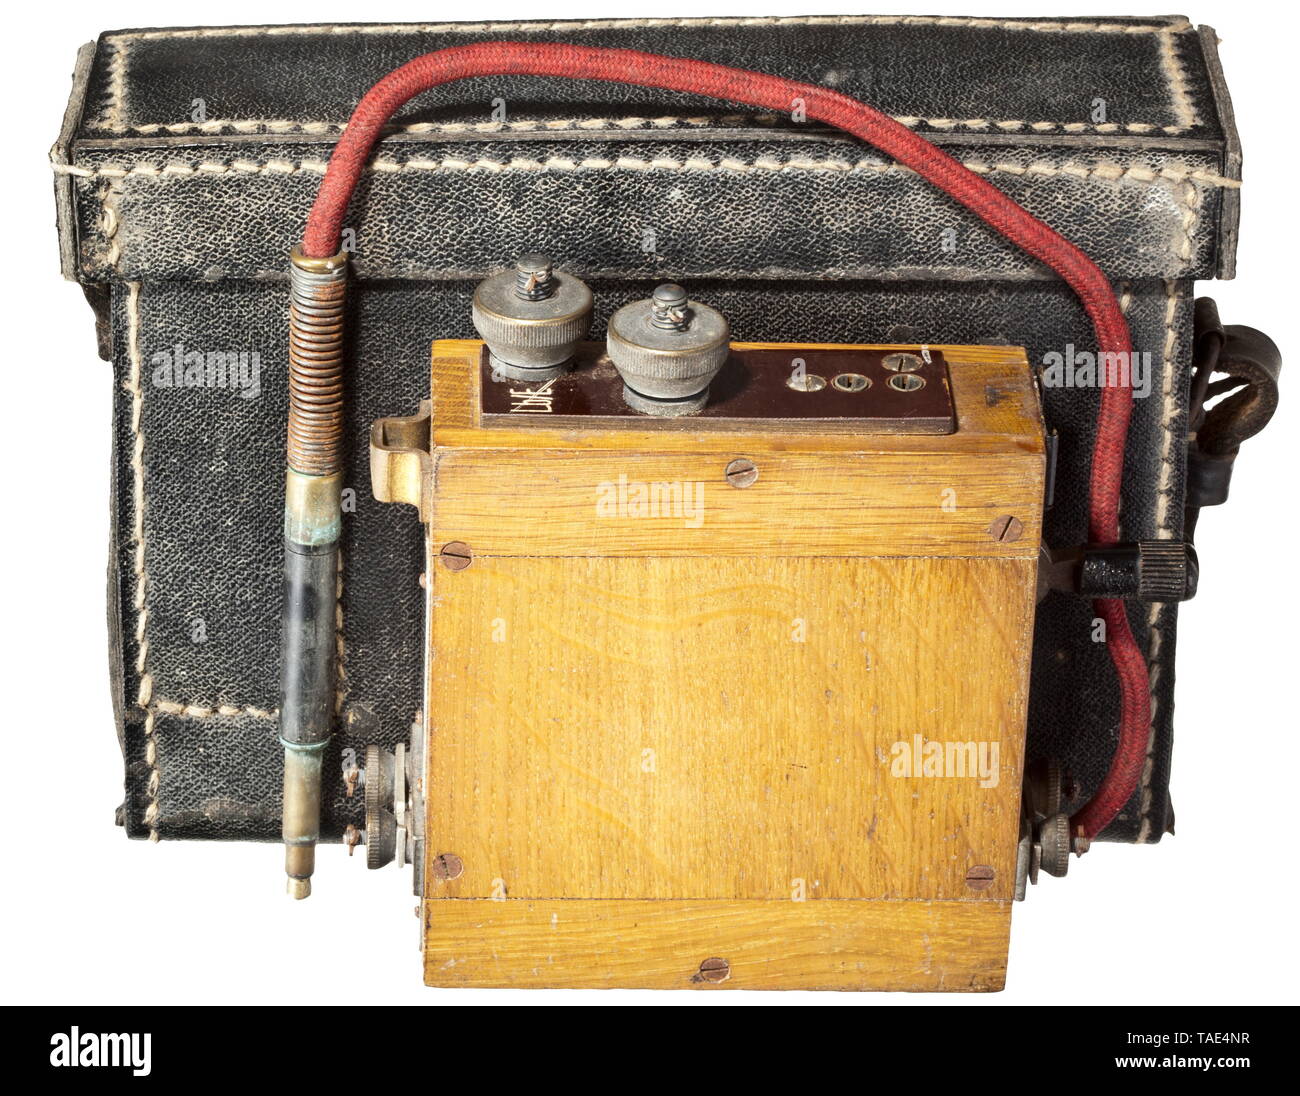 A testing device for field telephones and lines, with carrying case maker Hermann Schuster, Berlin 1943 historic, historical, 20th century, Editorial-Use-Only Stock Photo